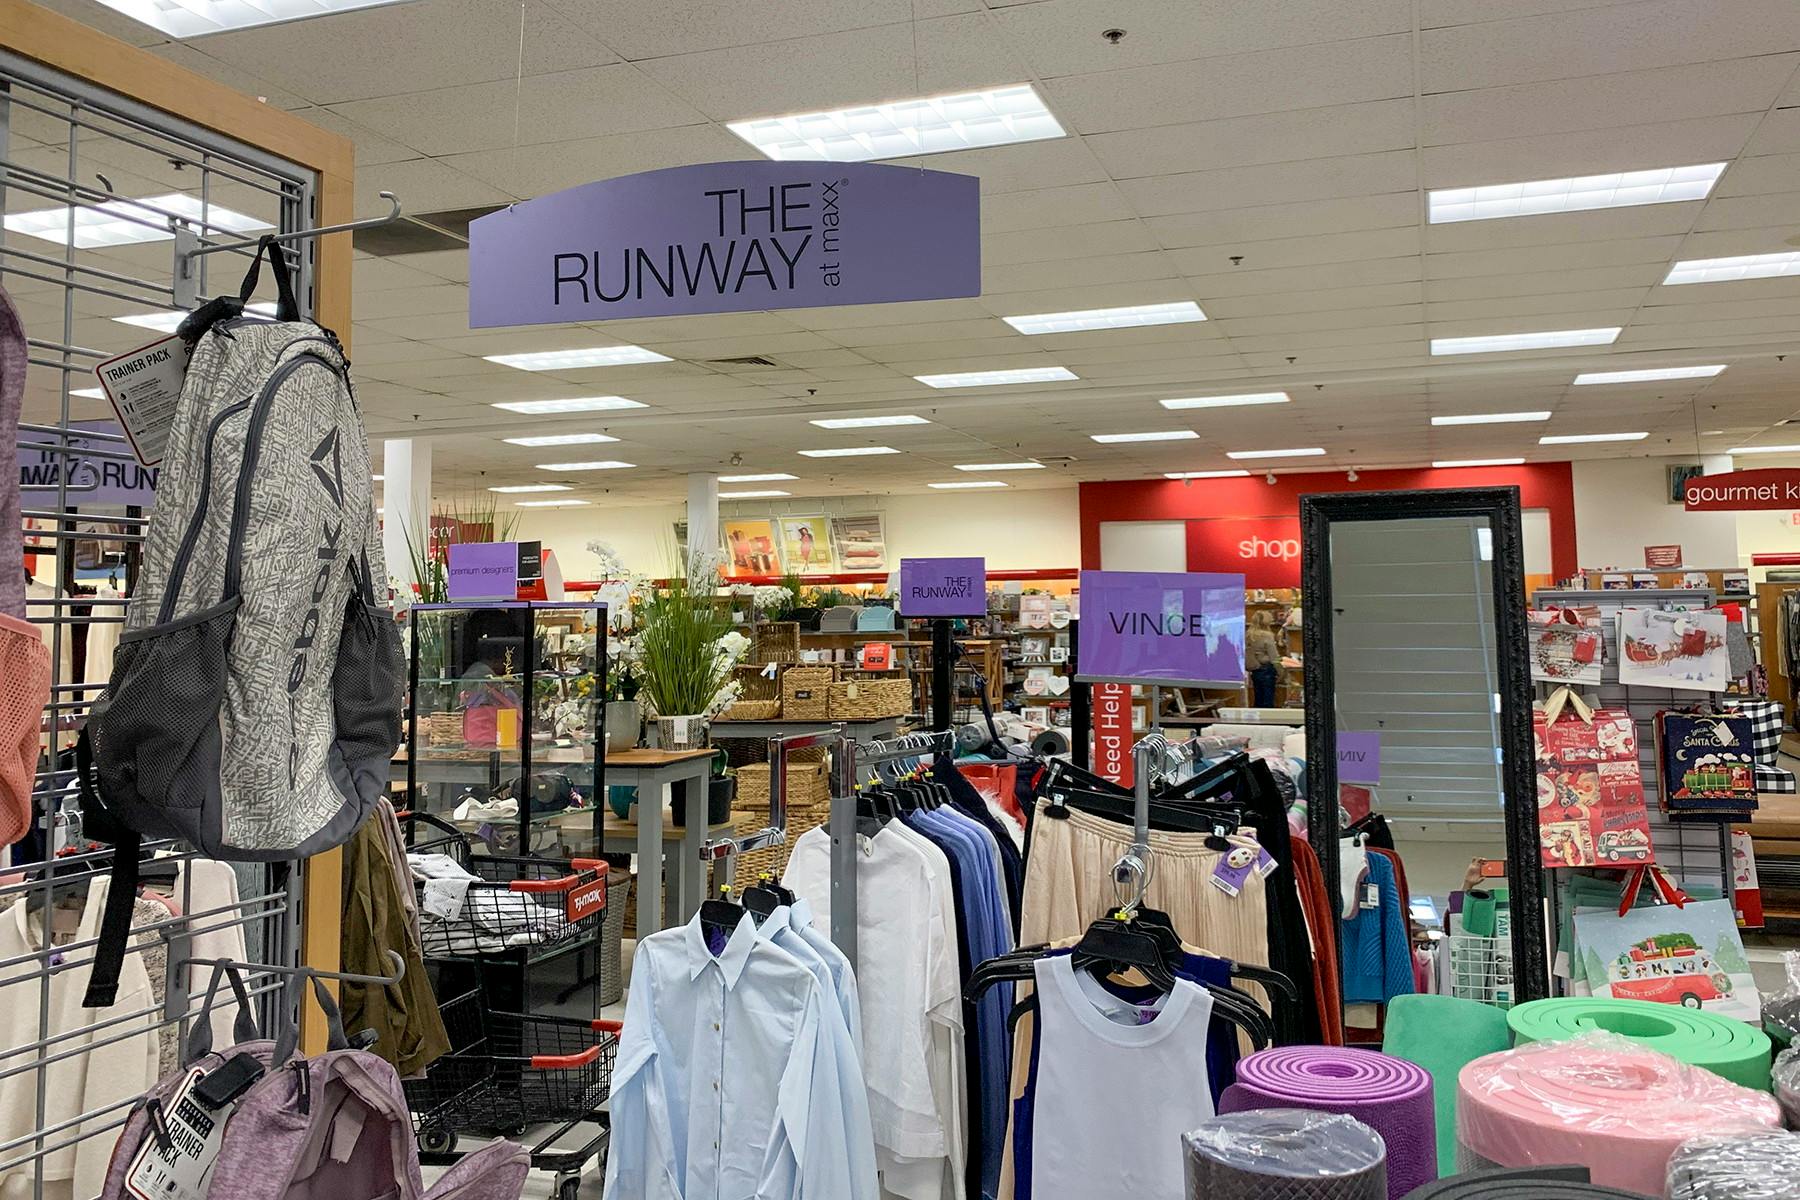 The Runway section at TJ Maxx.